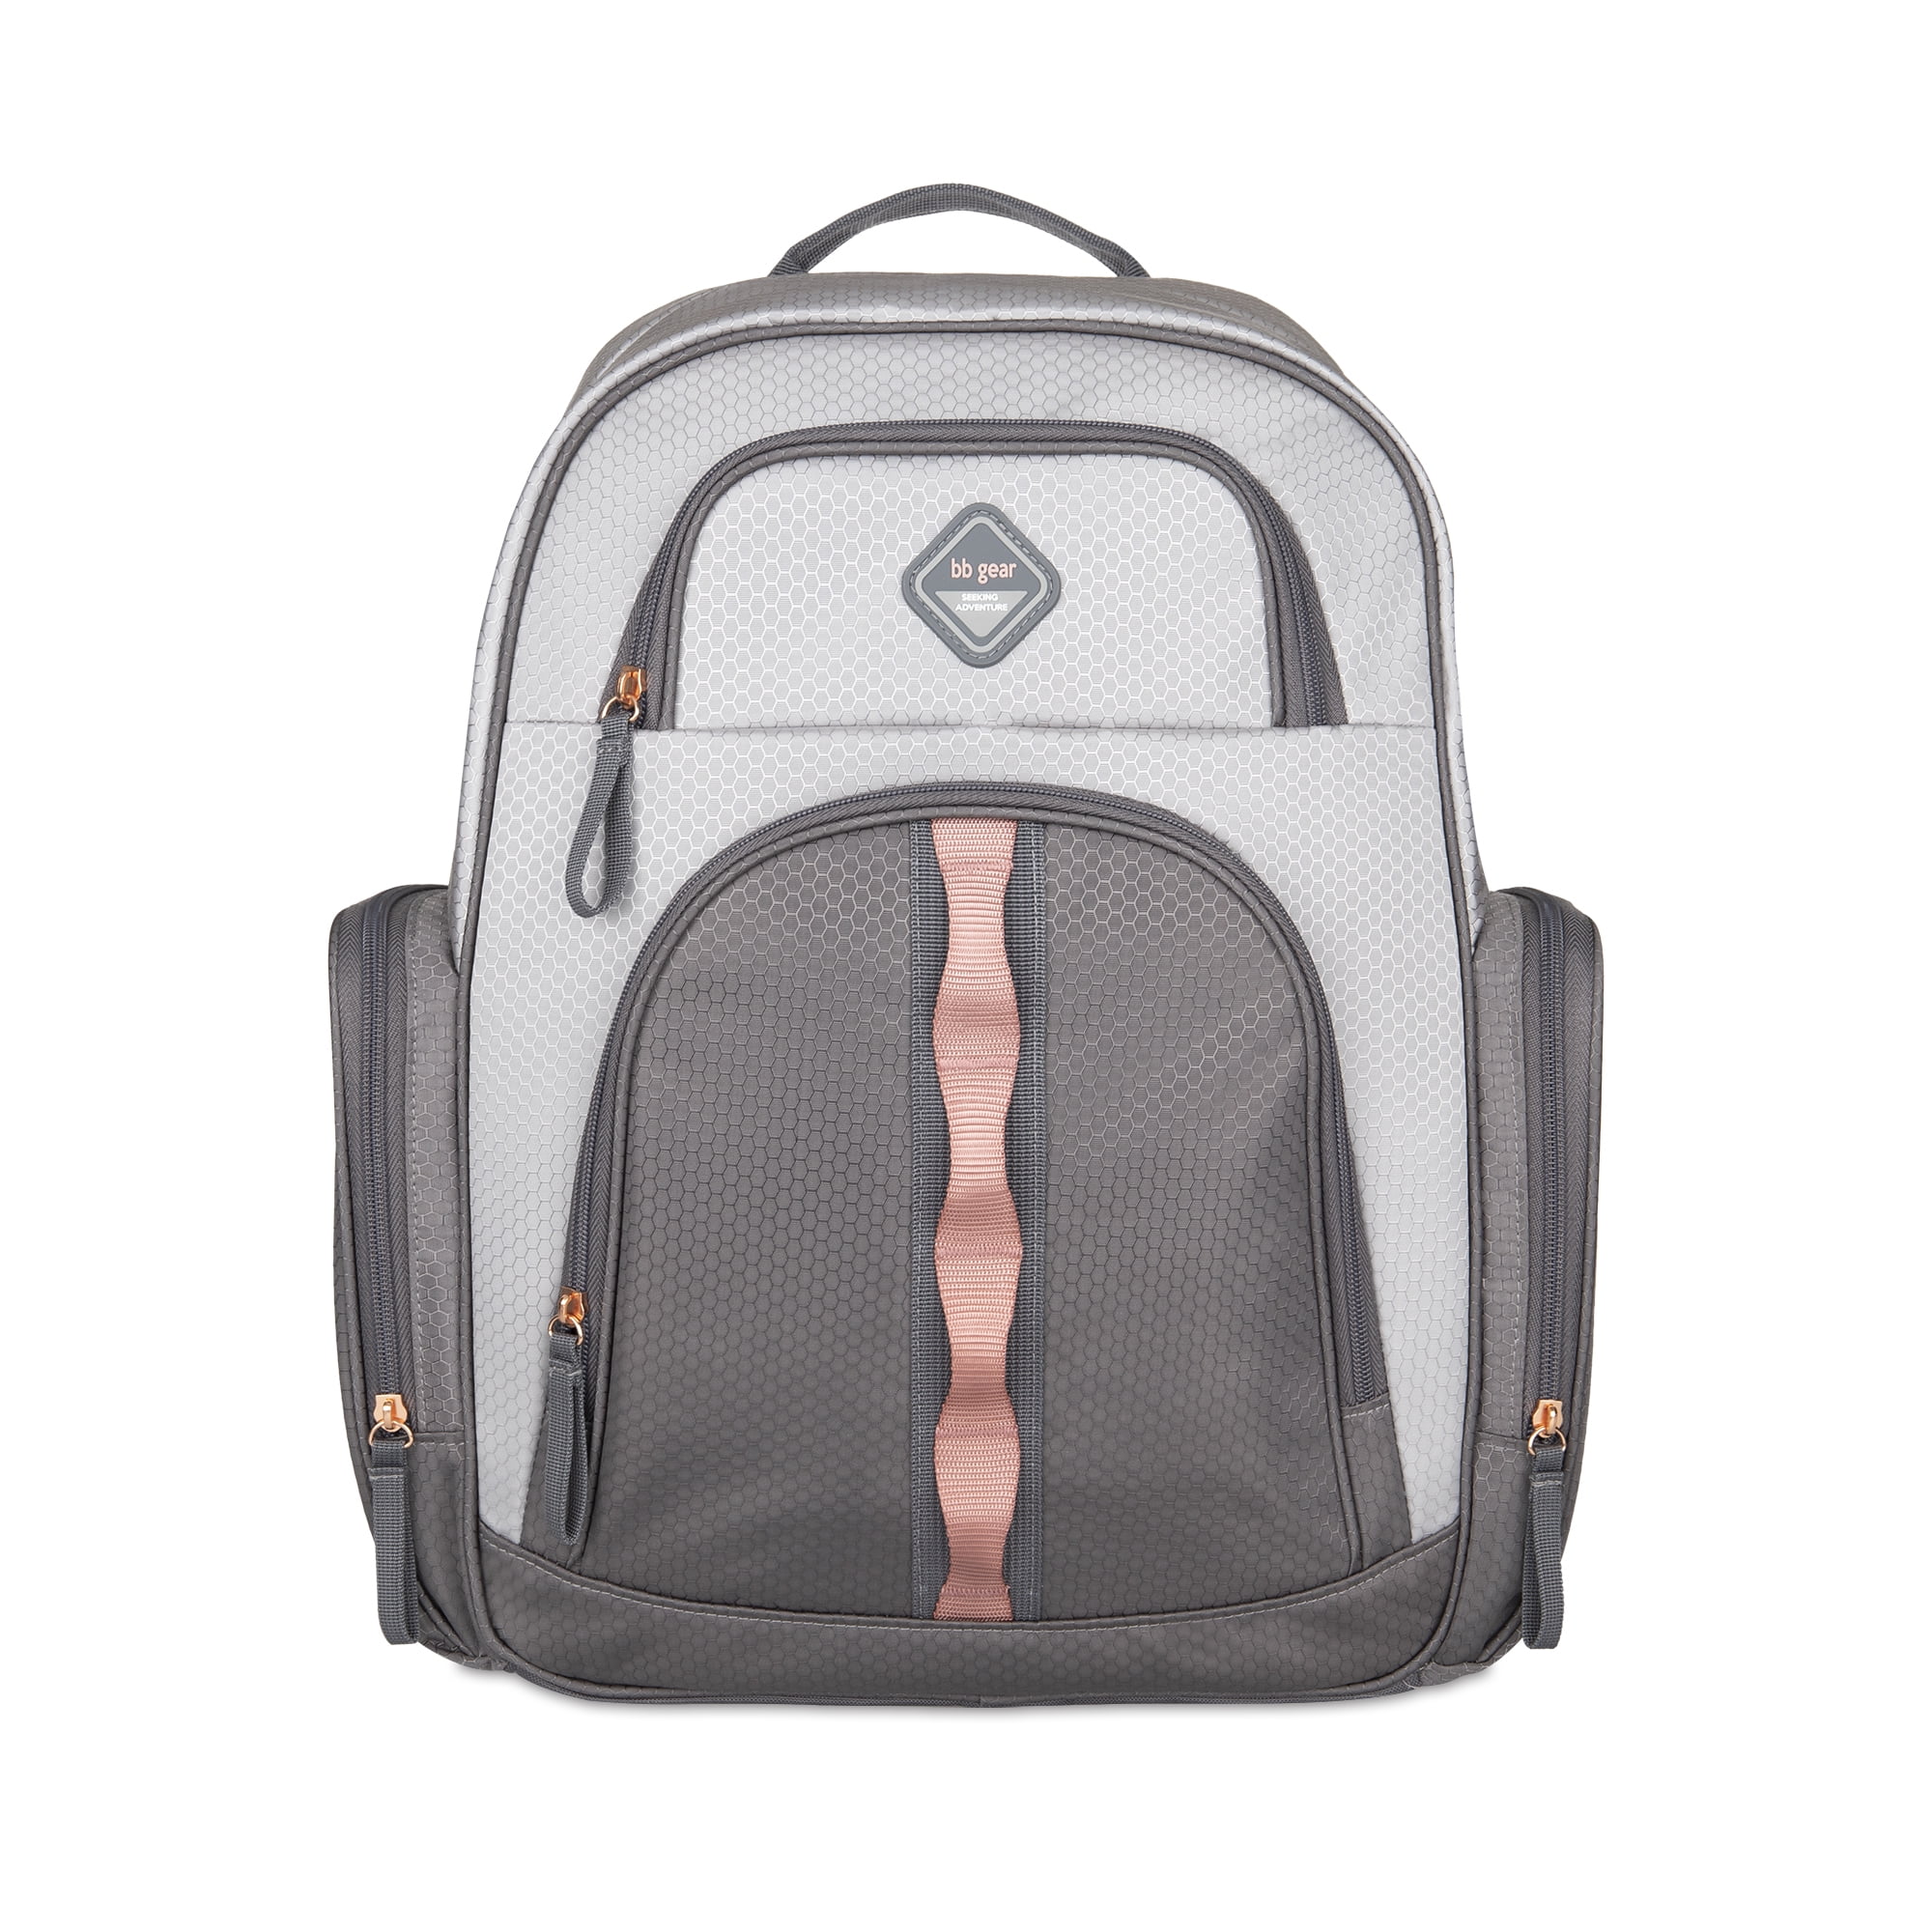 BB Gear by Baby Boom Backpack Diaper Bag